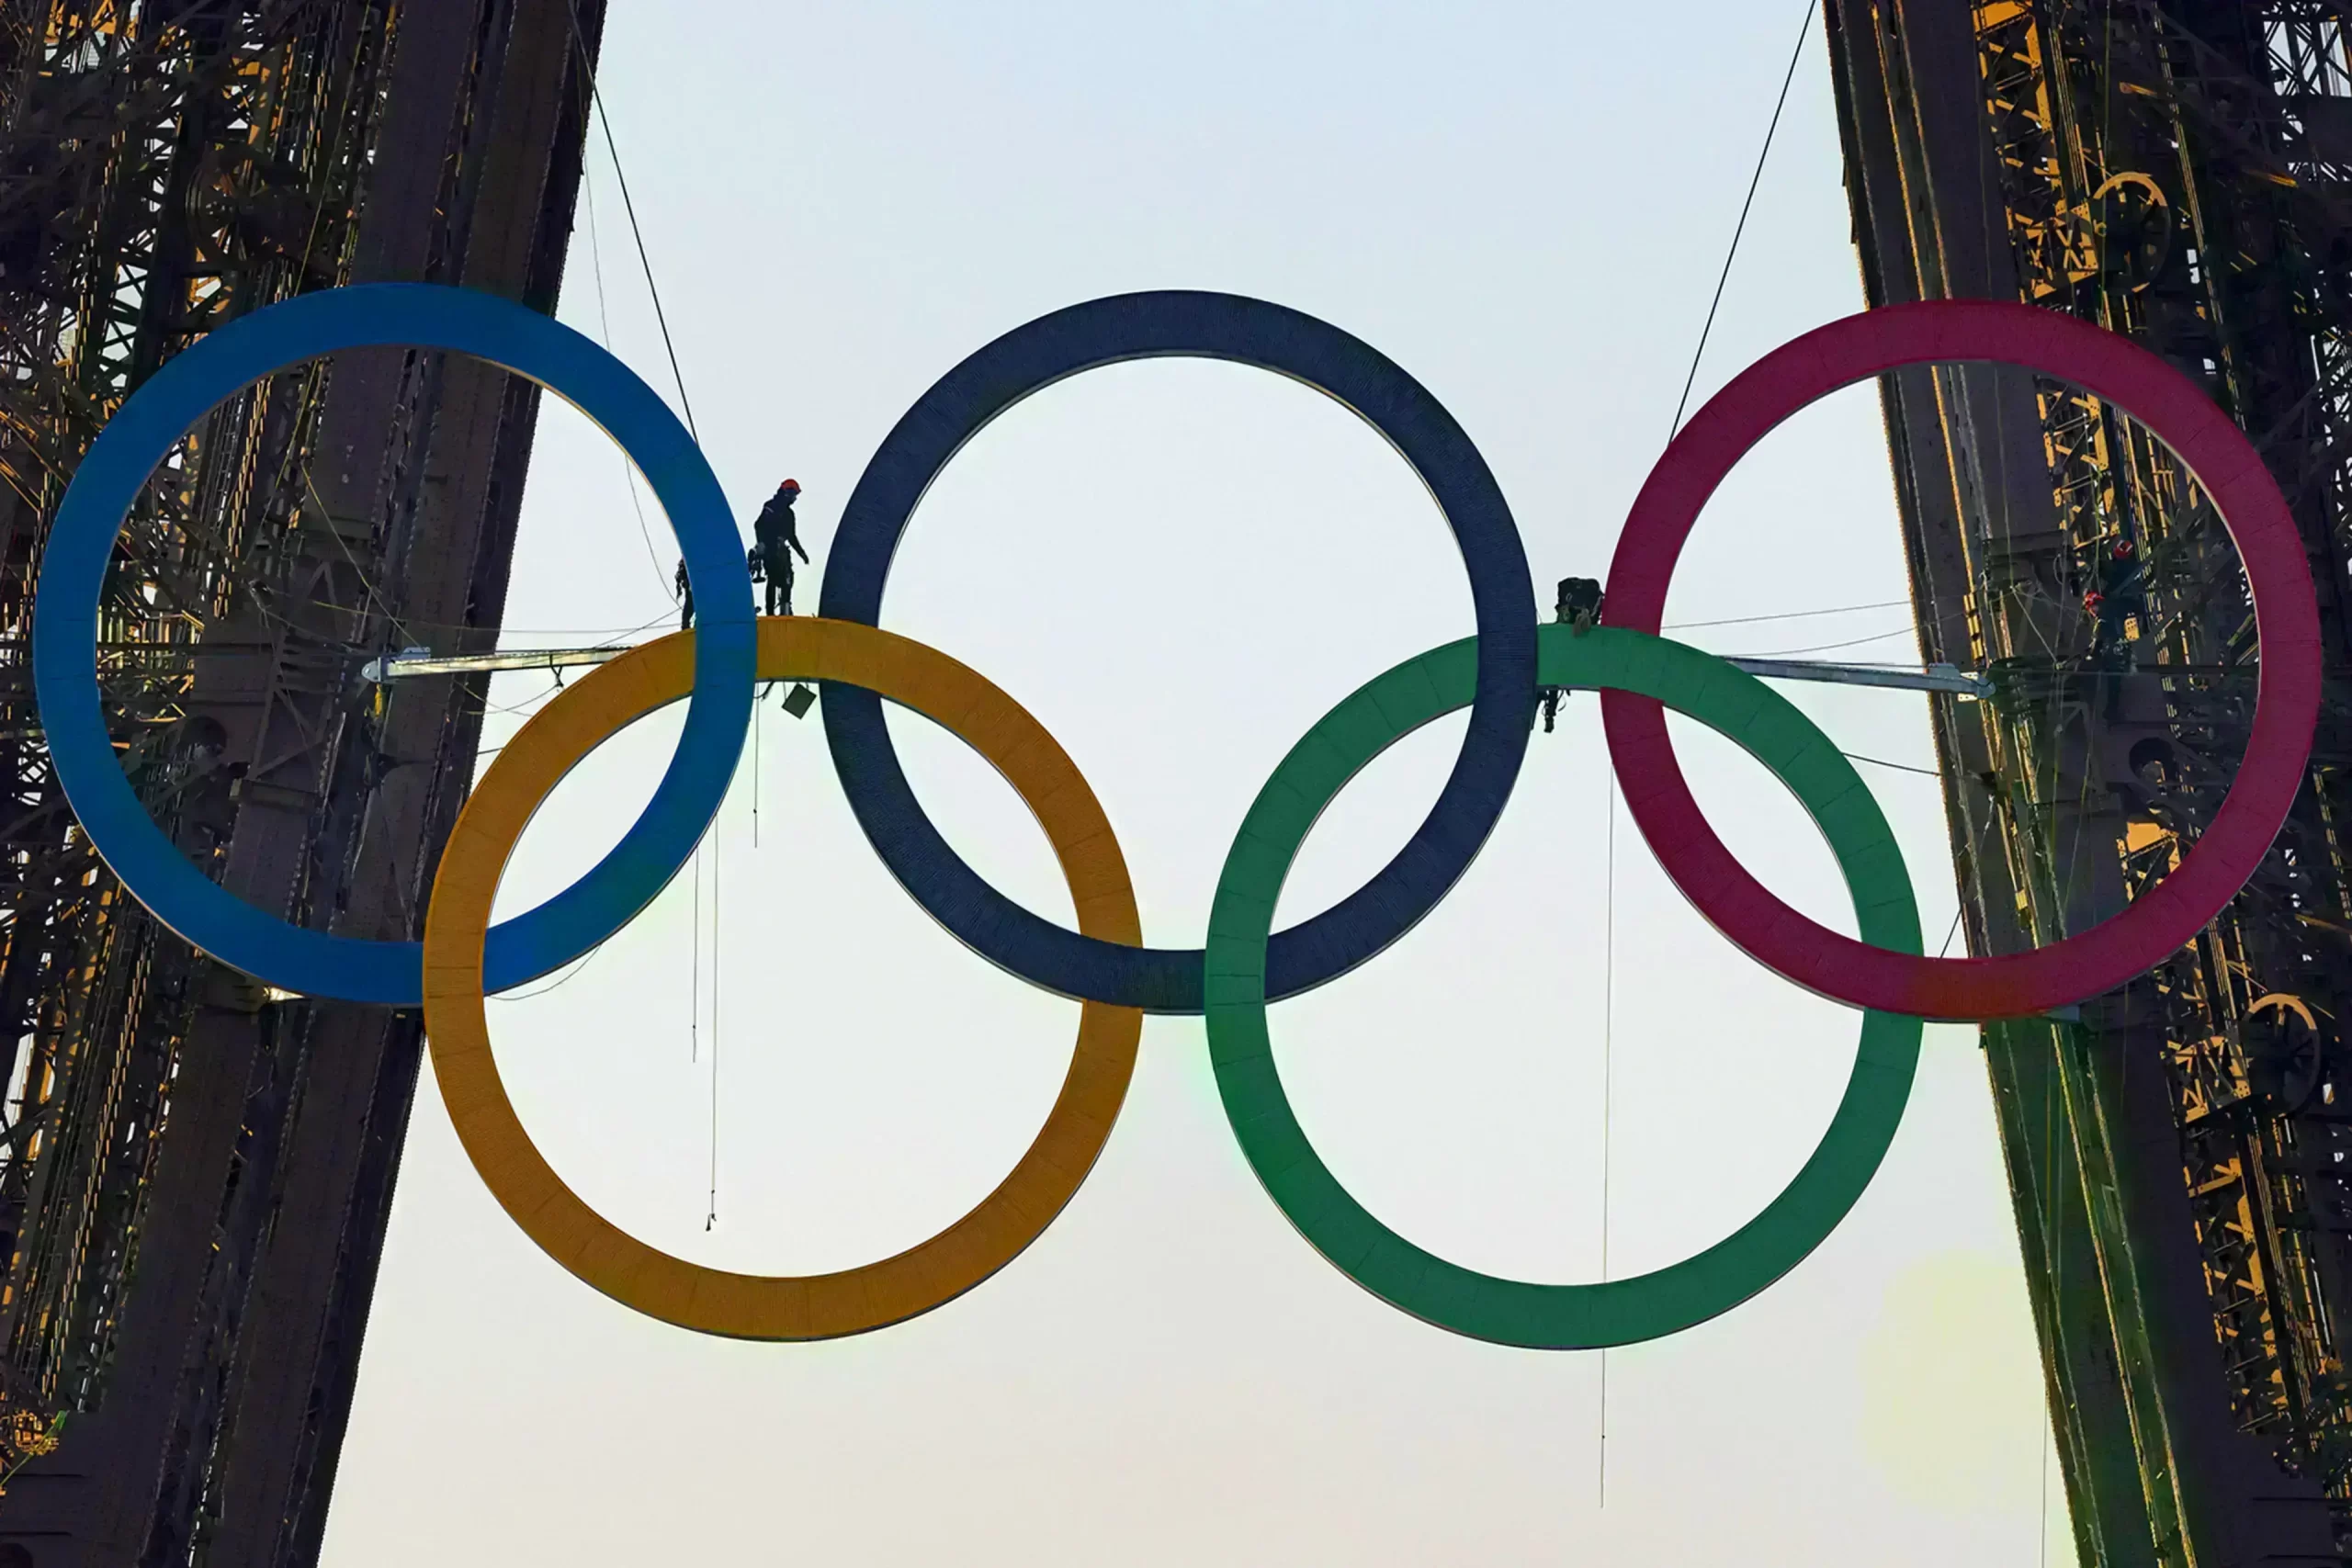 The Olympics Has Big Plans to Save Energy. Can You Learn From Them?